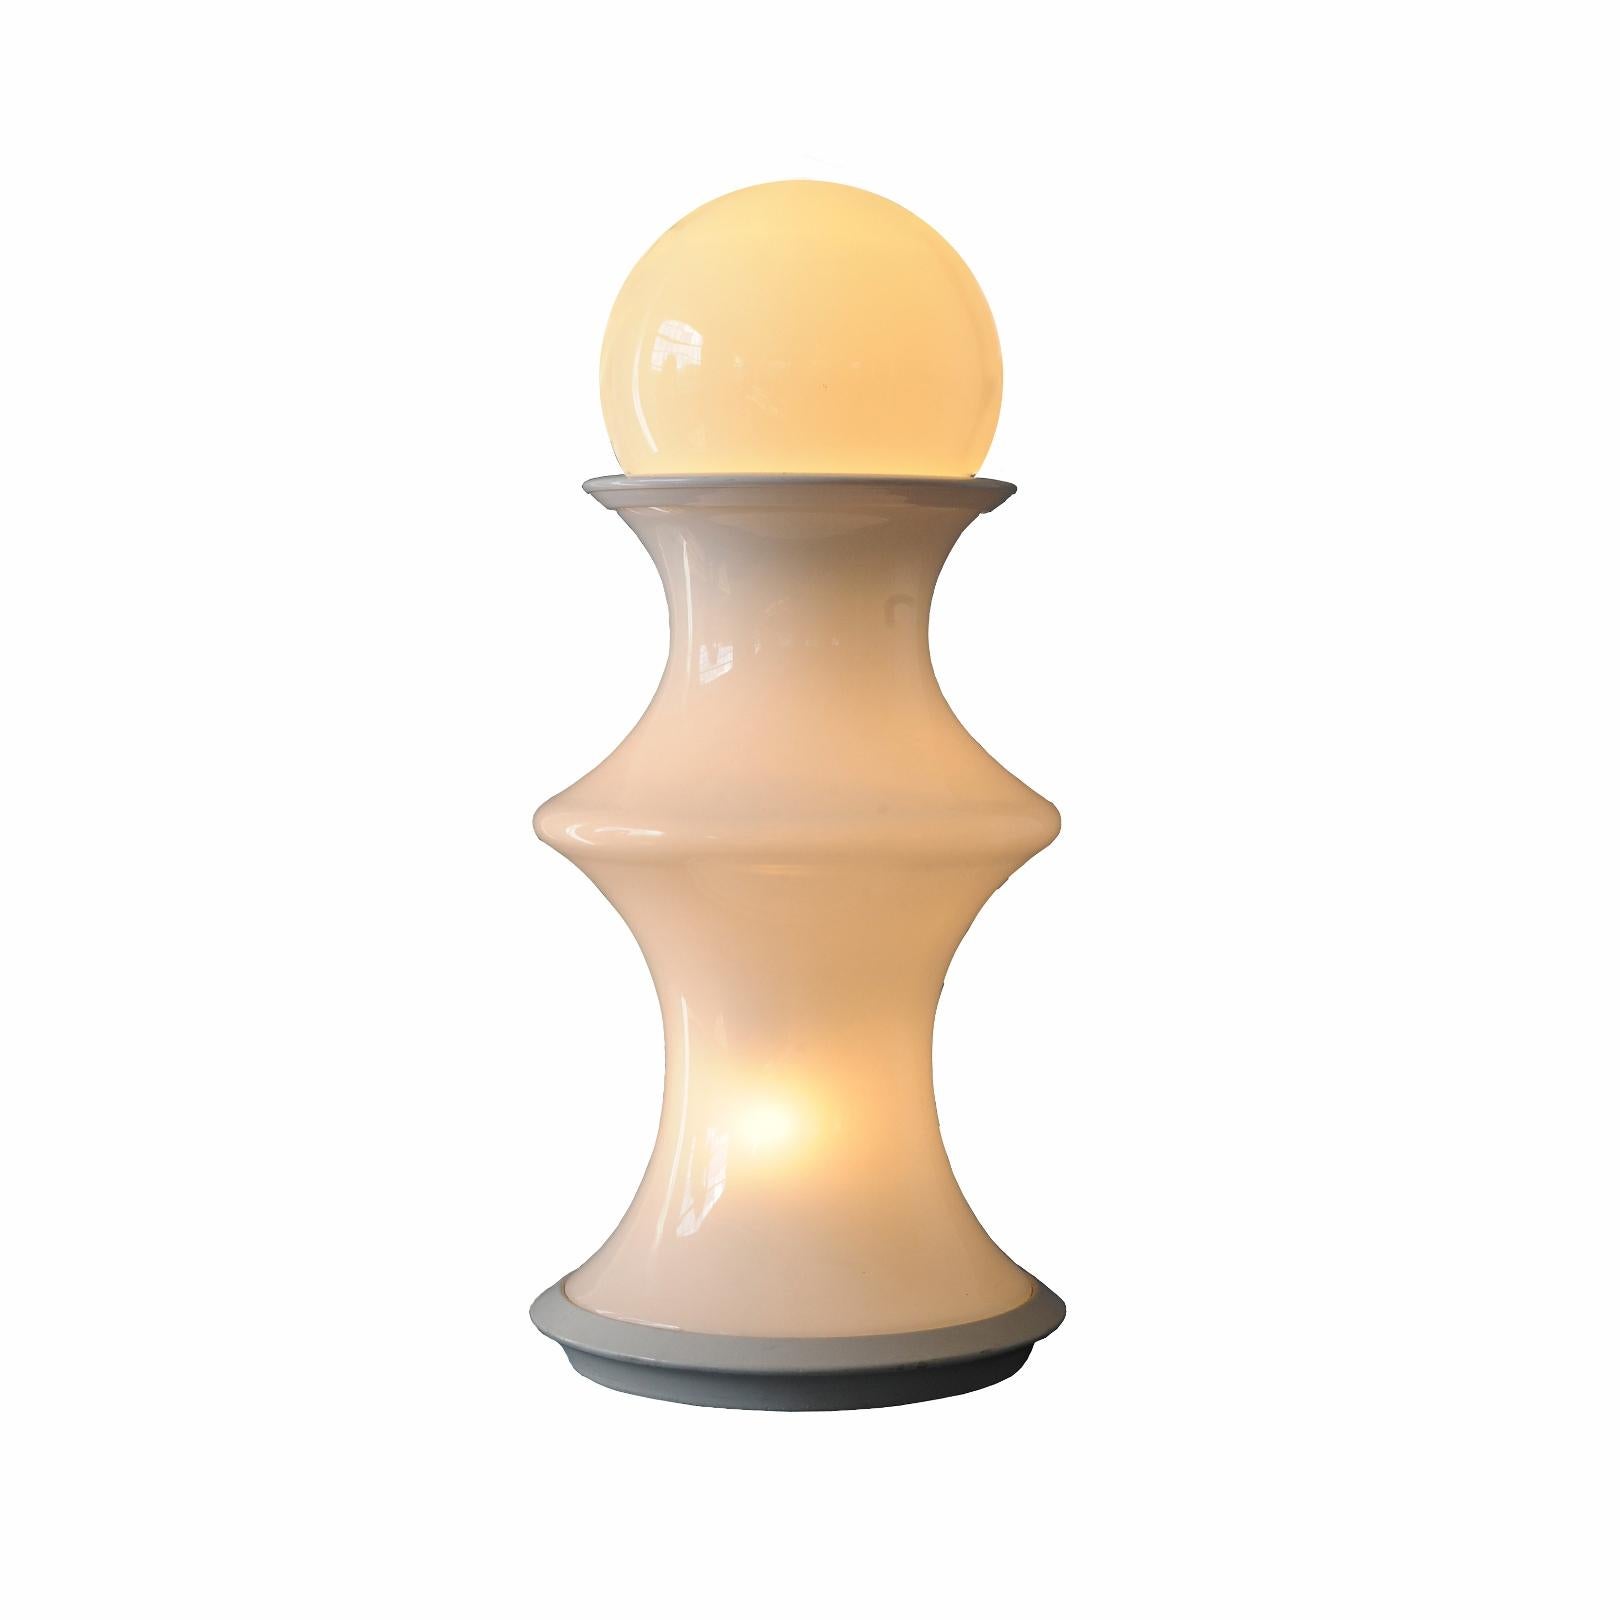 High quality thick opaline glass with removable sphere chess inspired lamp, named white foot soldier.
The lamp has a dimmer with possibility of combining illumination of body part of the lamp or the sphere on top or both.
 